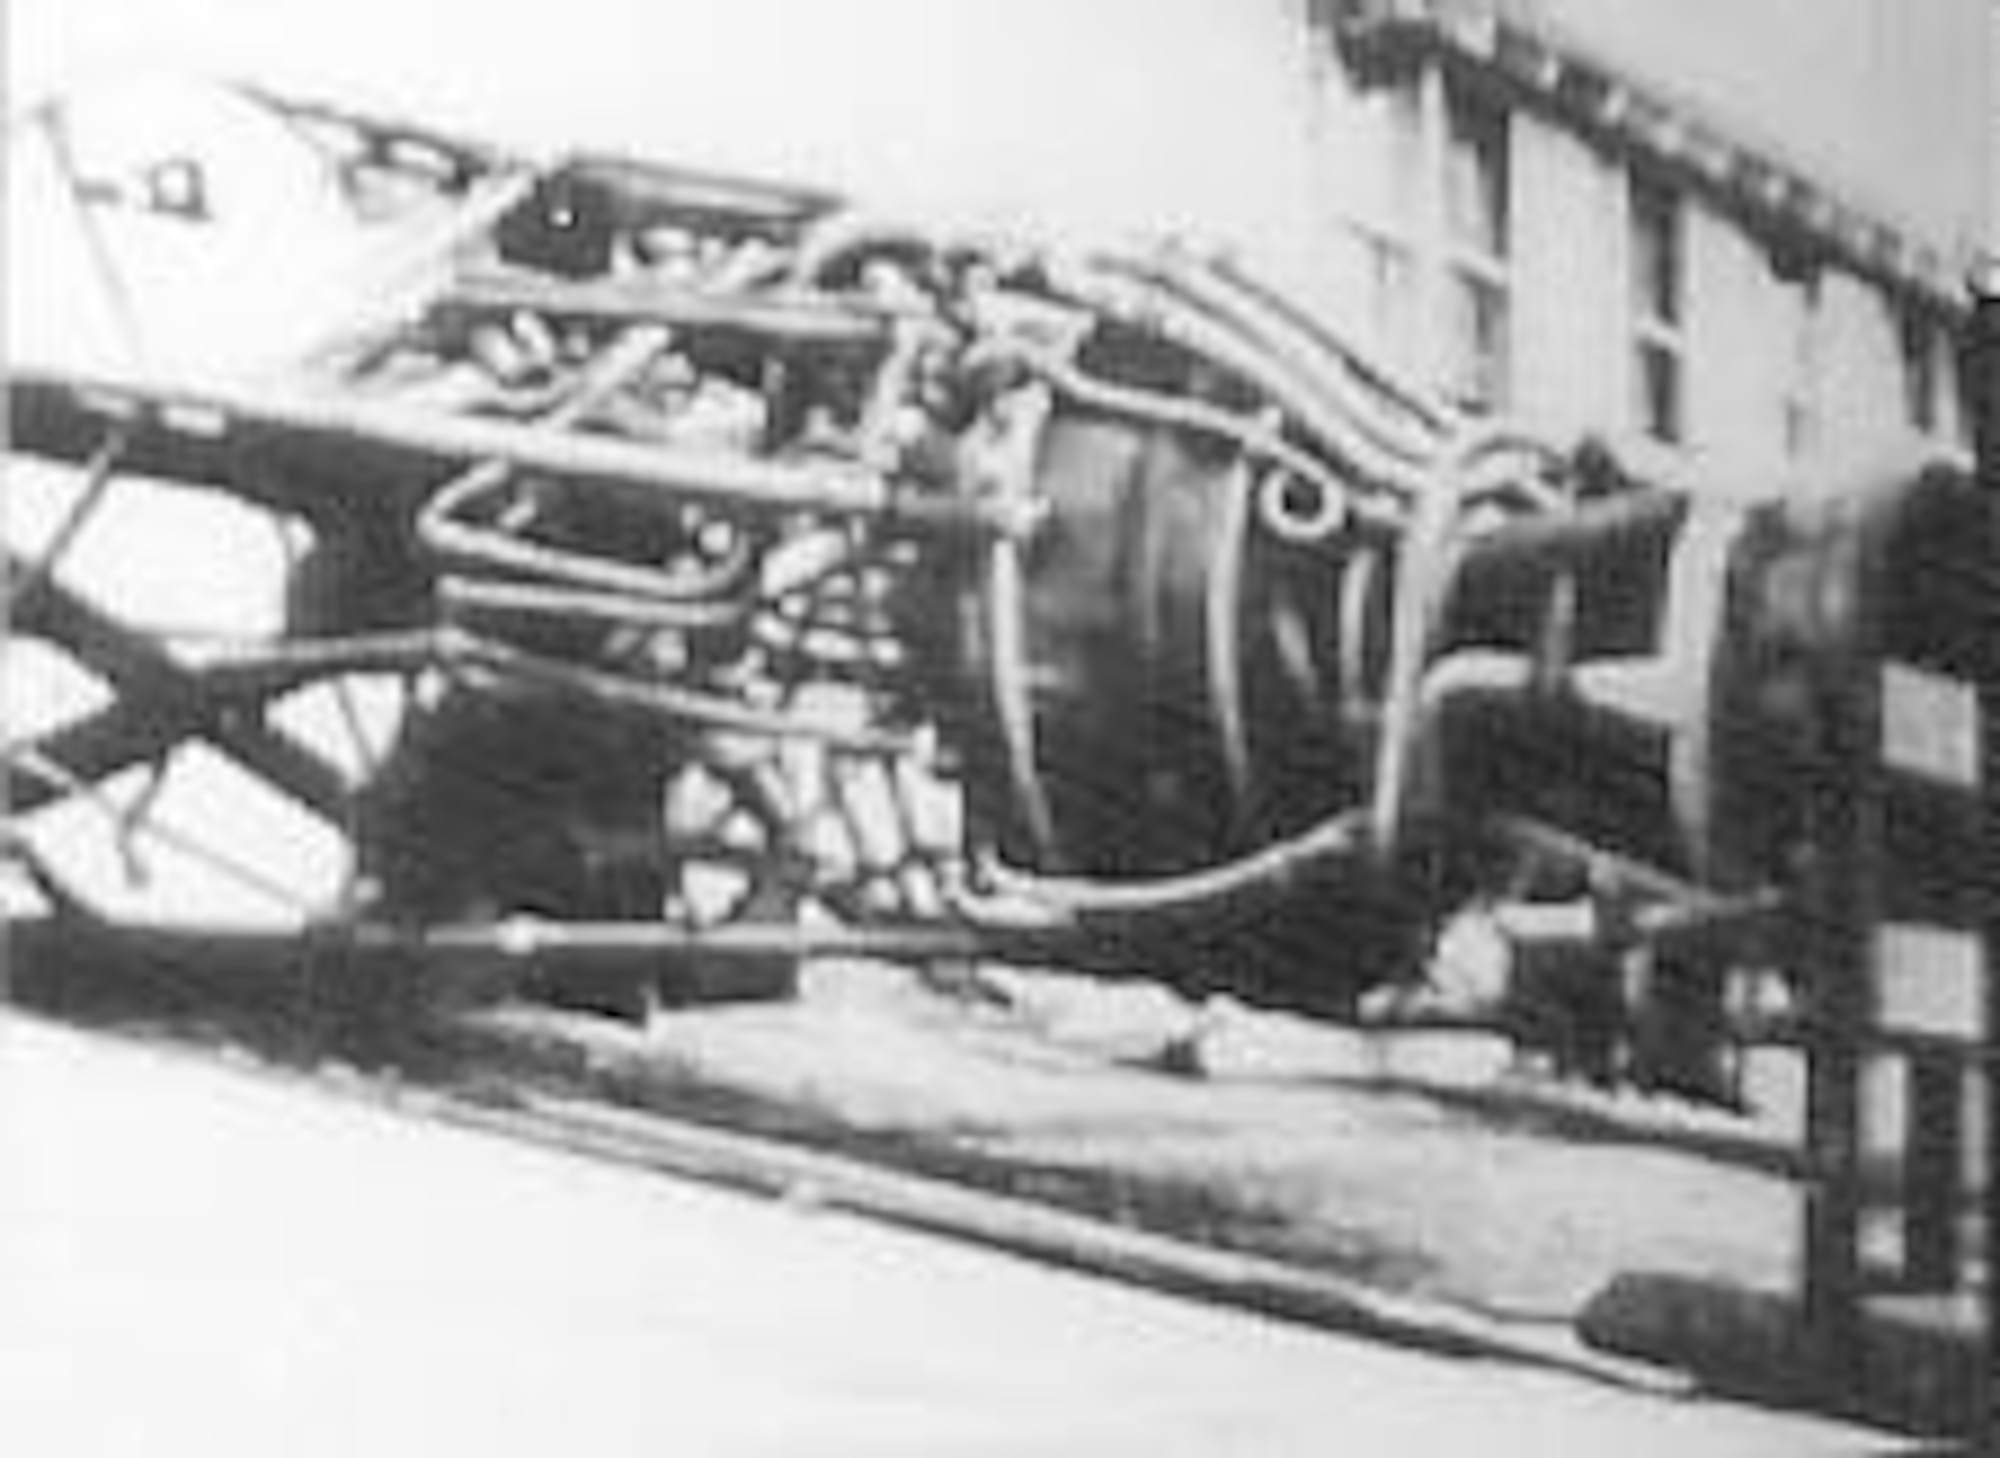 The rocket engine used in a German V-2 missile during World War II. (U.S. Air Force photo)